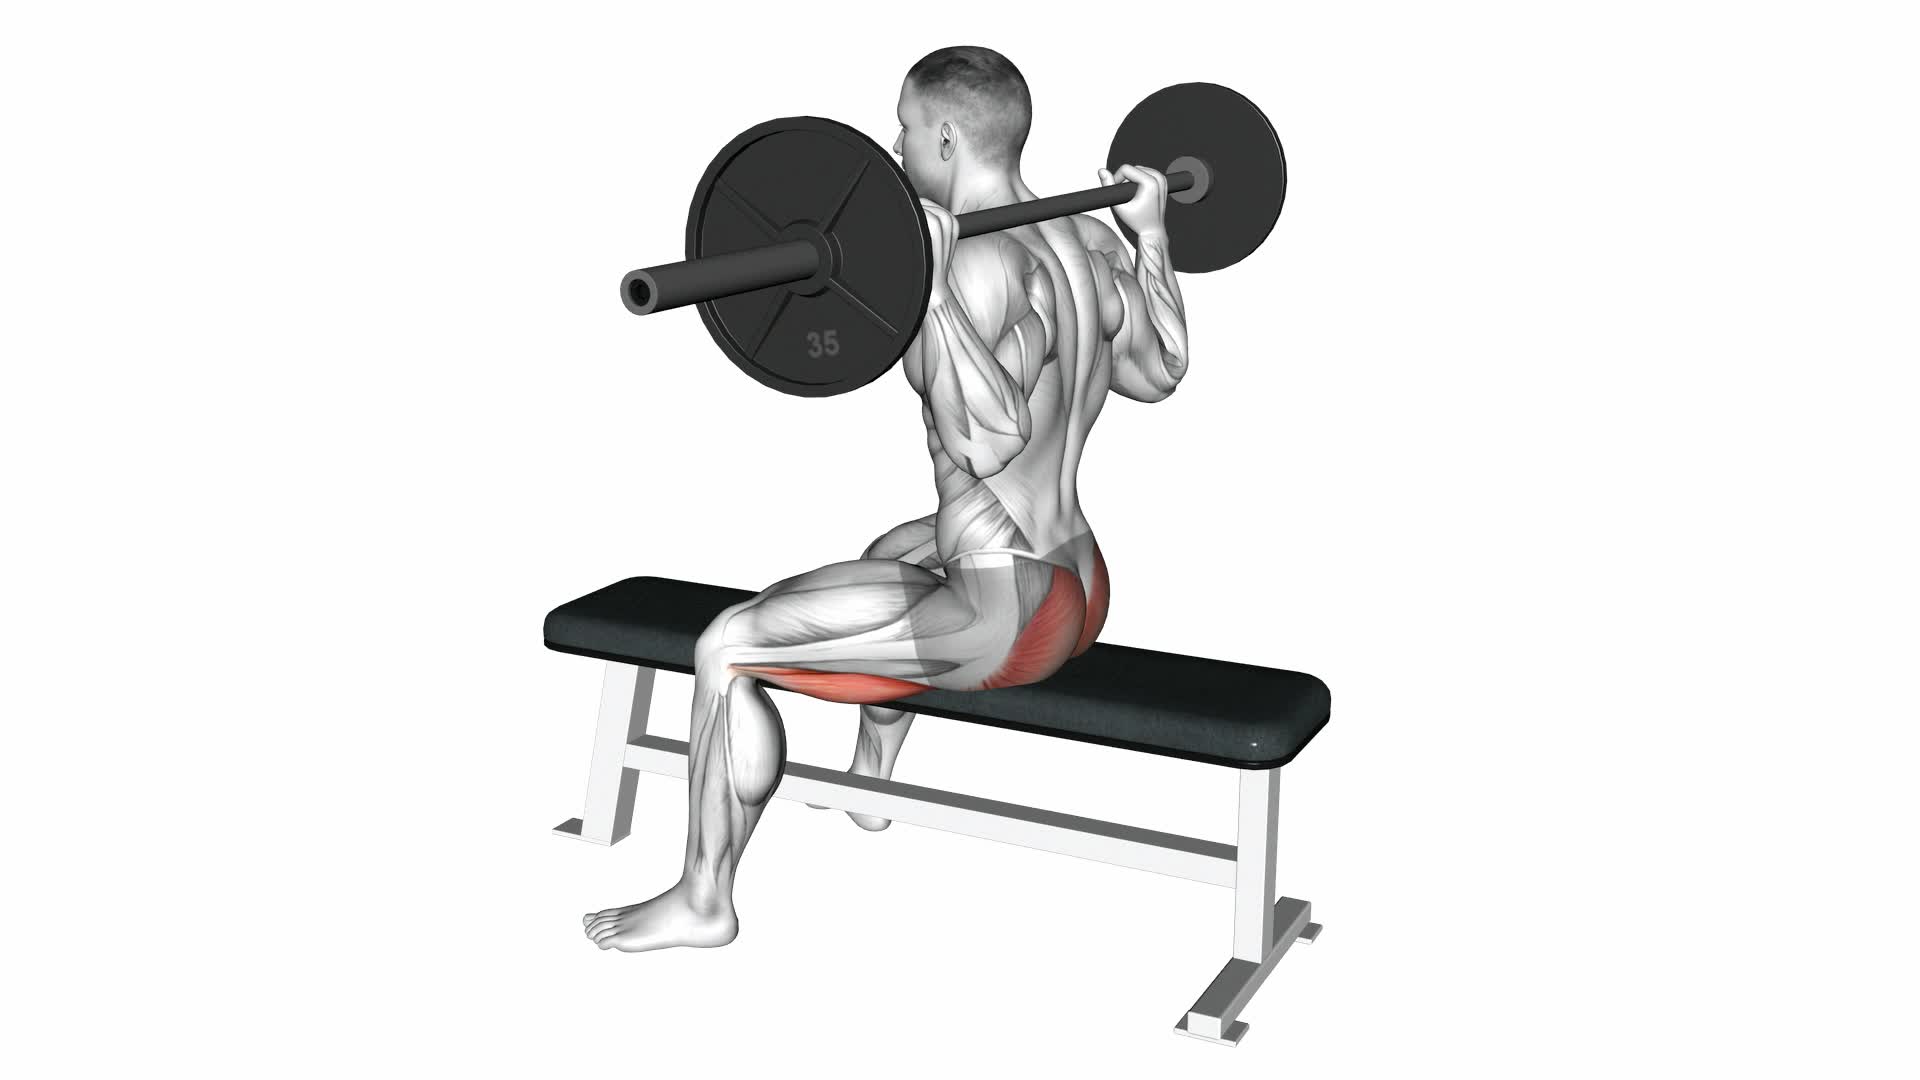 Barbell Seated Good Morning - Video Exercise Guide & Tips